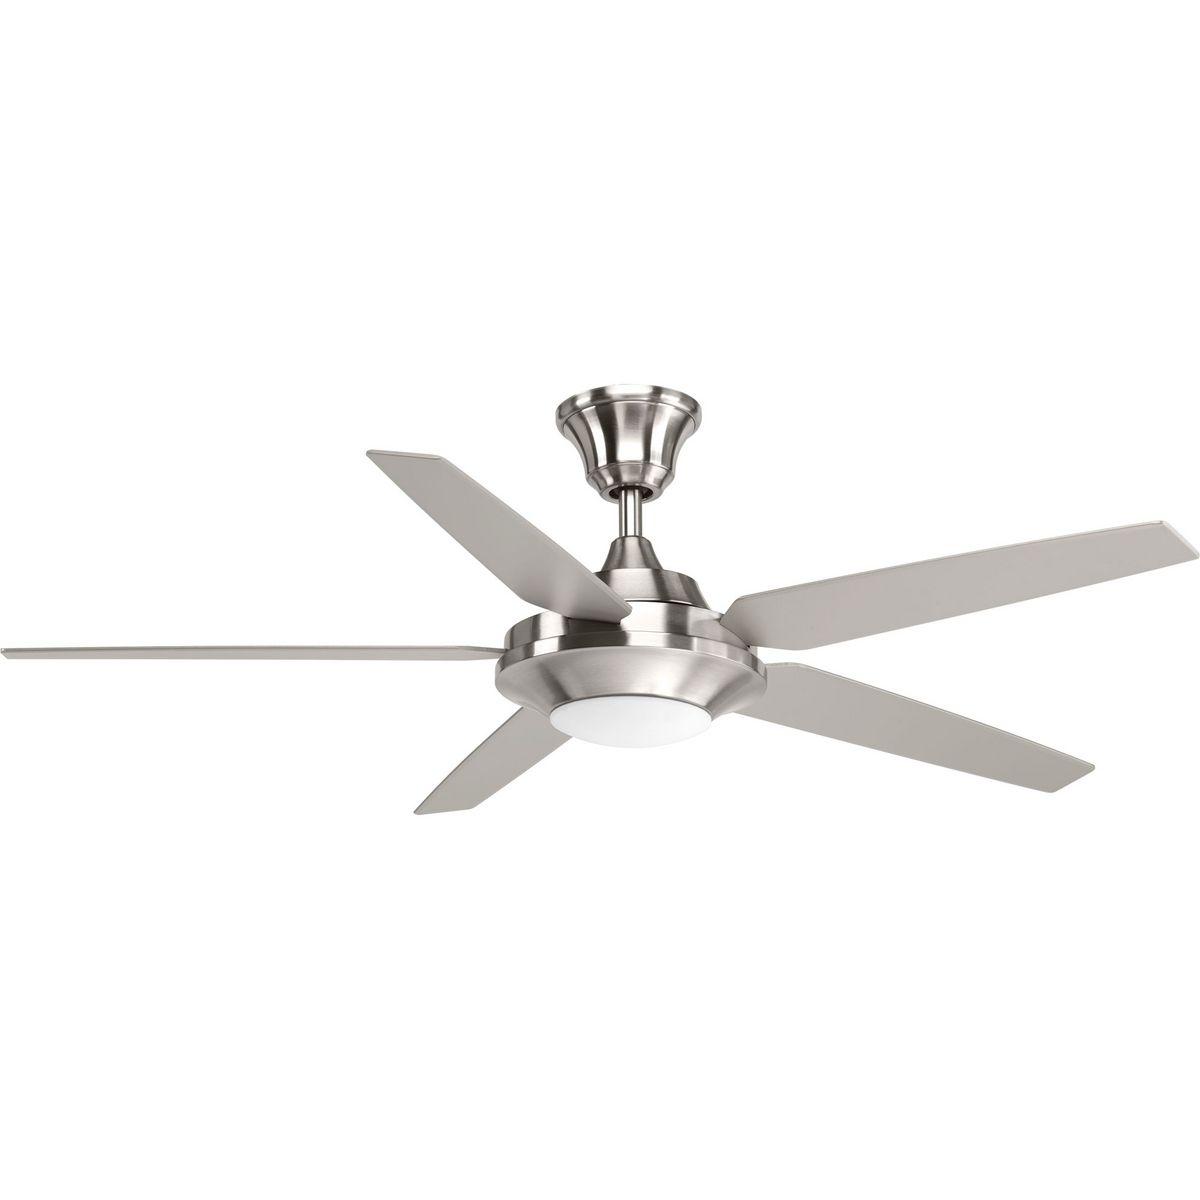 Hubbell P2539-0930K Five-blade 54 inch Signature Plus II ceiling fan with five reversible blades in silver and driftwood. The LED light source, offering both form and function with energy- and cost-savings benefits, contains a white opal shatterproof shade and is comprised o